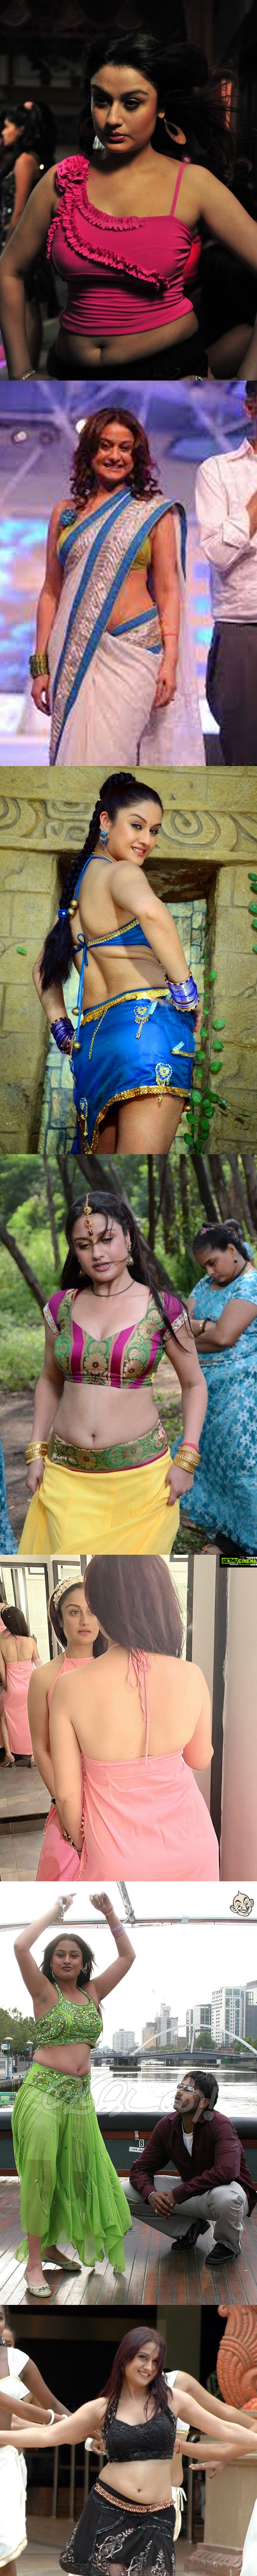 Sonia Agarwal Sex Padam Video - Hot Pics! Here are times South actress Sonia Agarwal raised temperature  with her hot looks